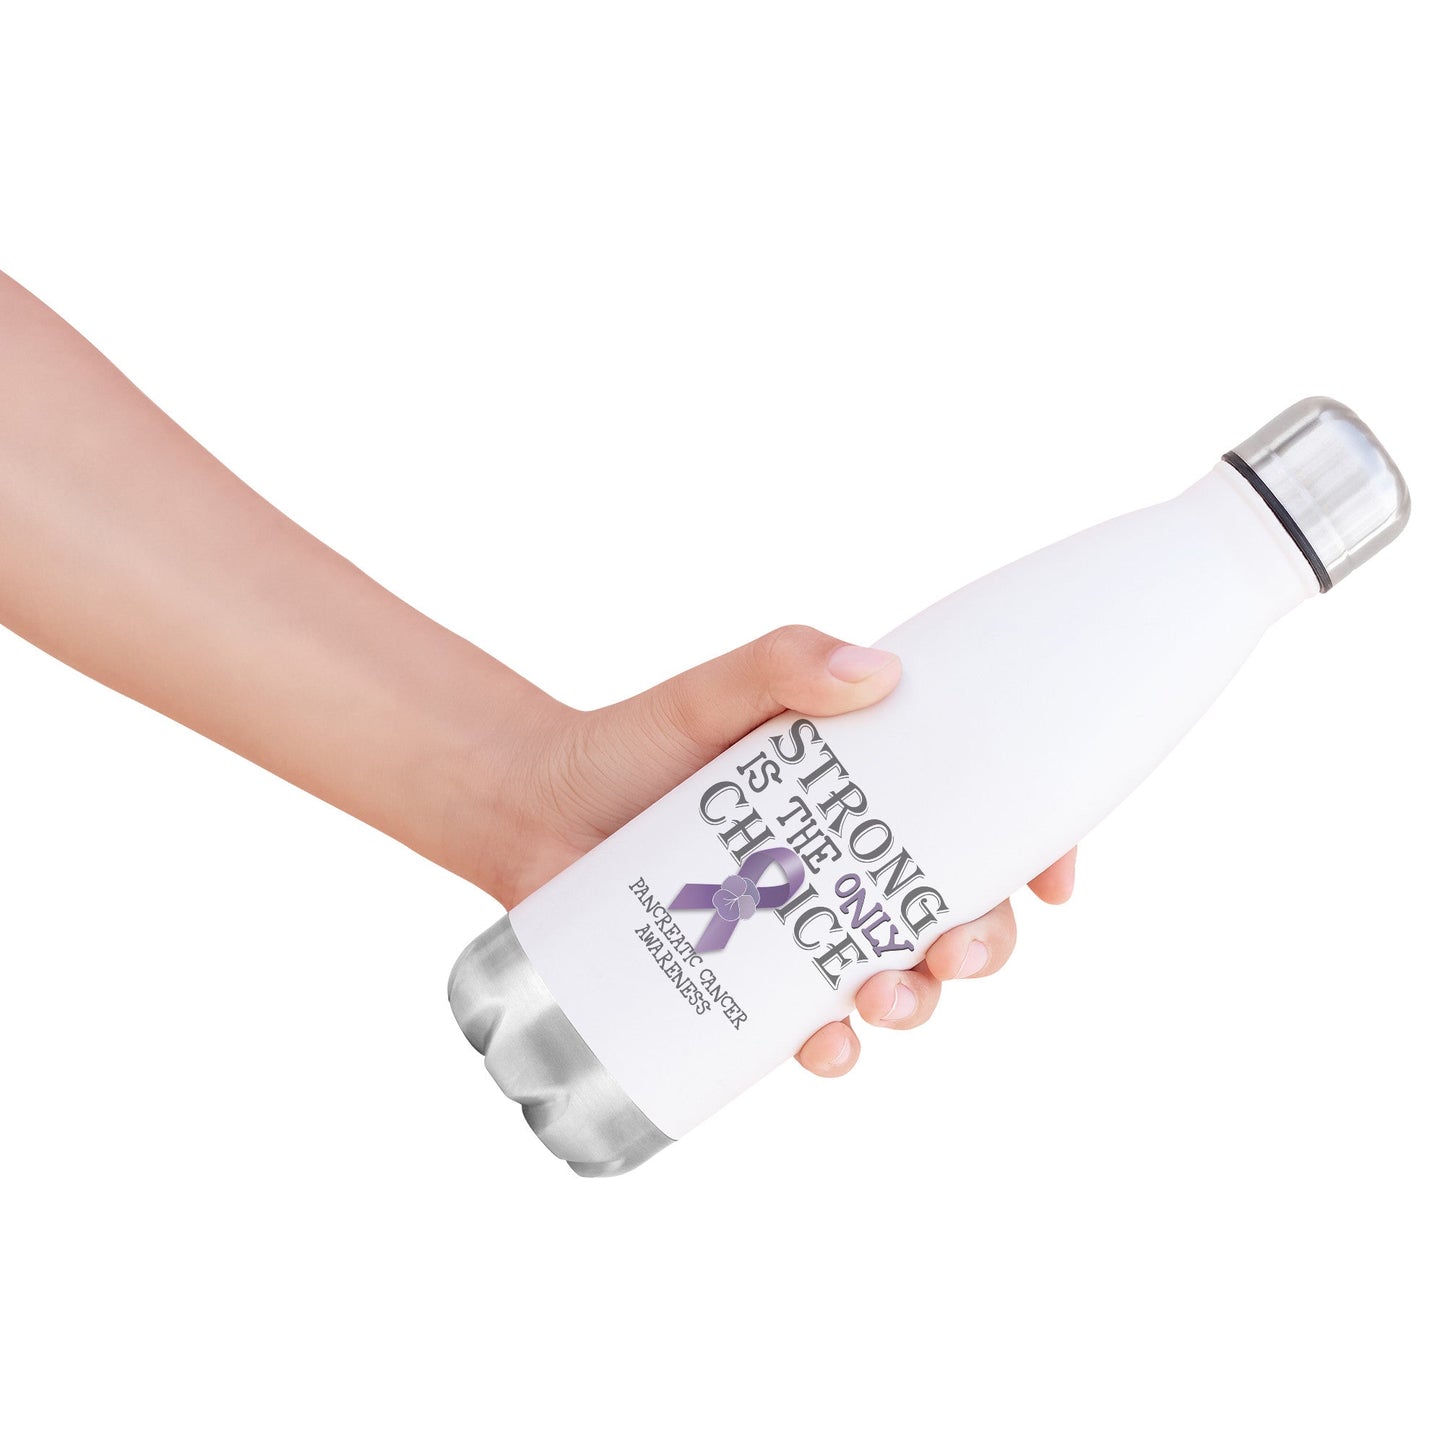 Strong is the Only Choice -Pancreatic Cancer Awareness 20oz Insulated Water Bottle |x|